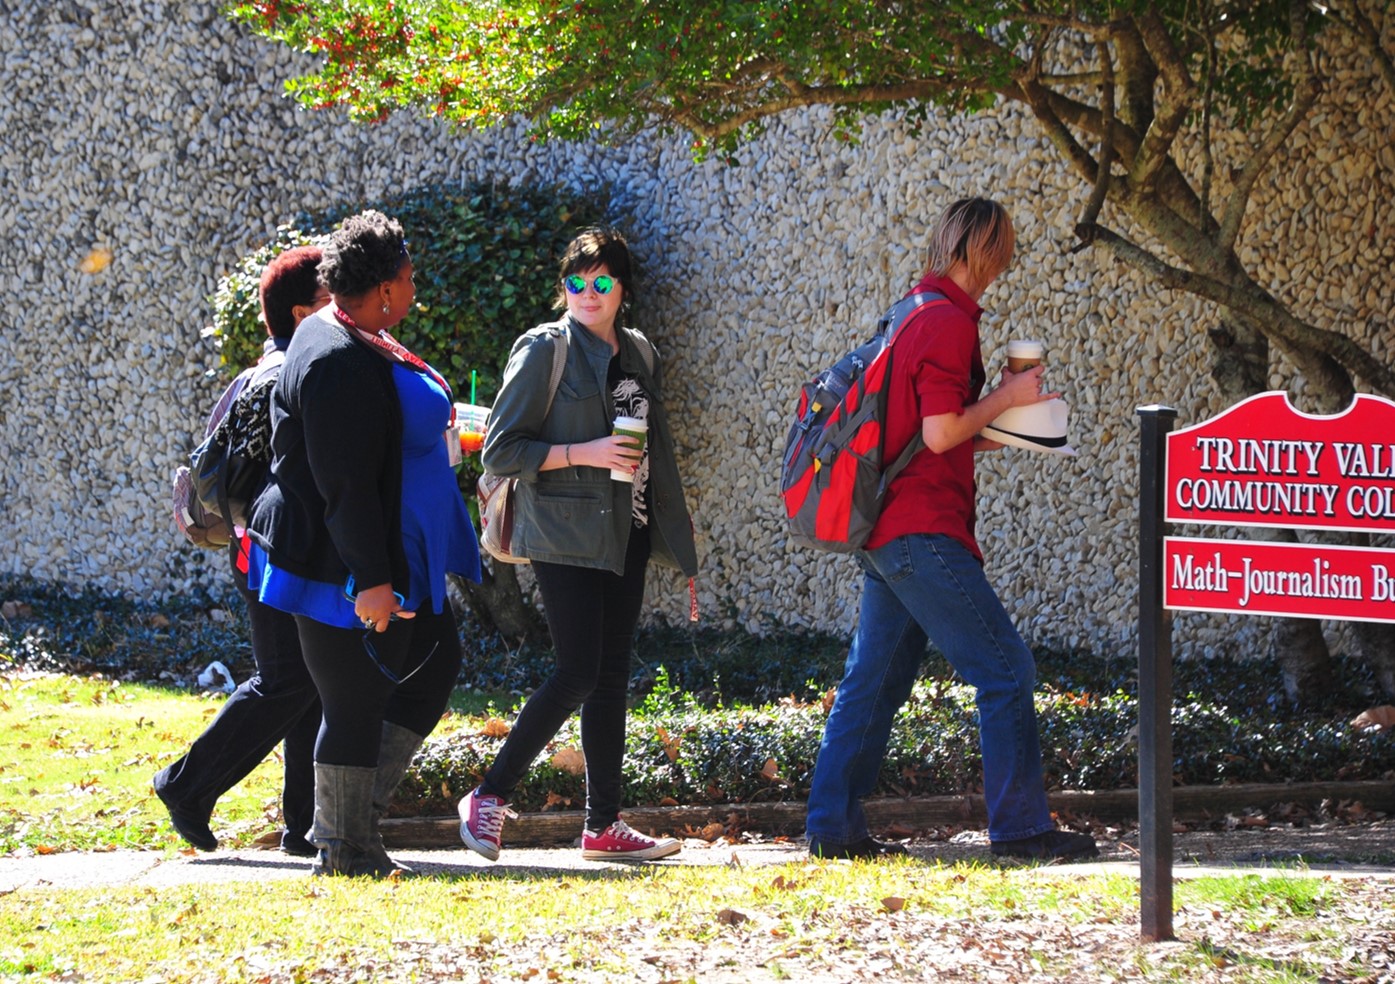 Students walking on campus                                                                                                                  